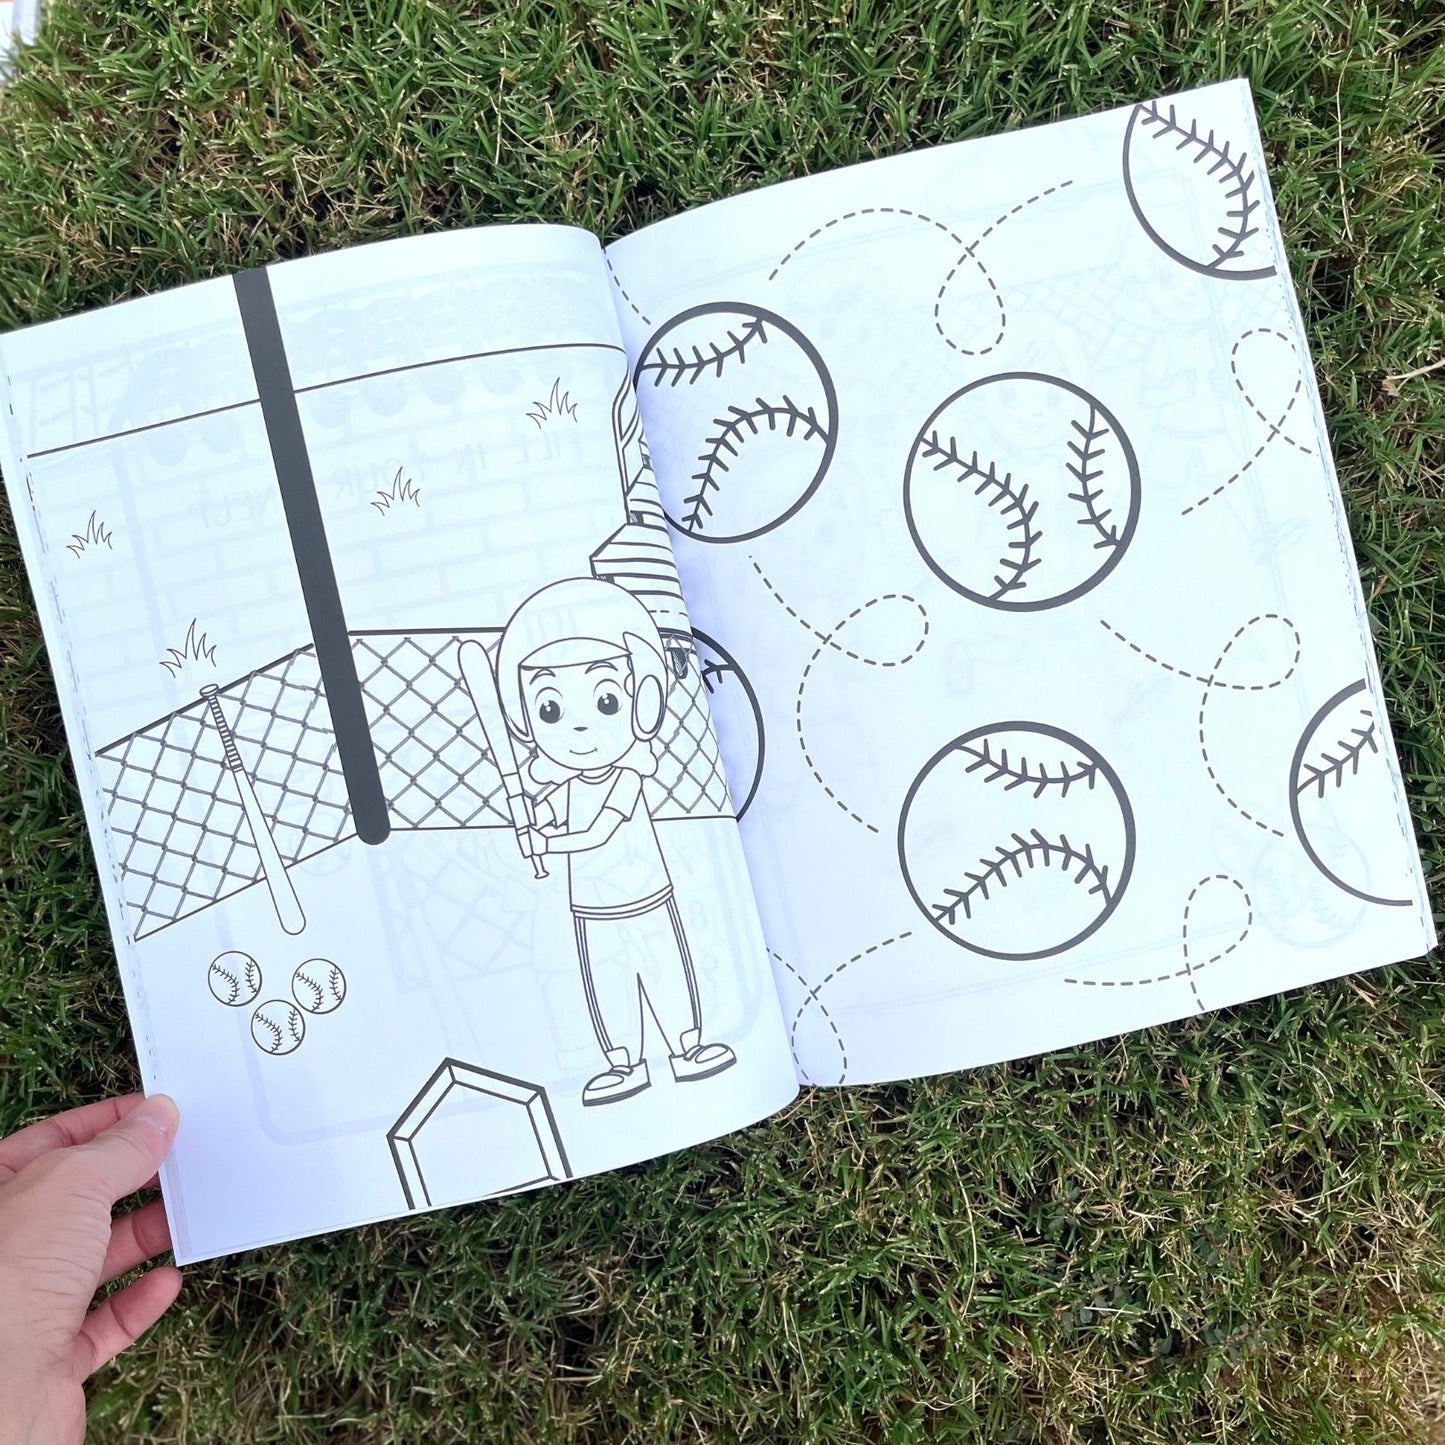 So Your Mom Is A Softball Coach: A Coloring and Activity Book for the Coach's Kid